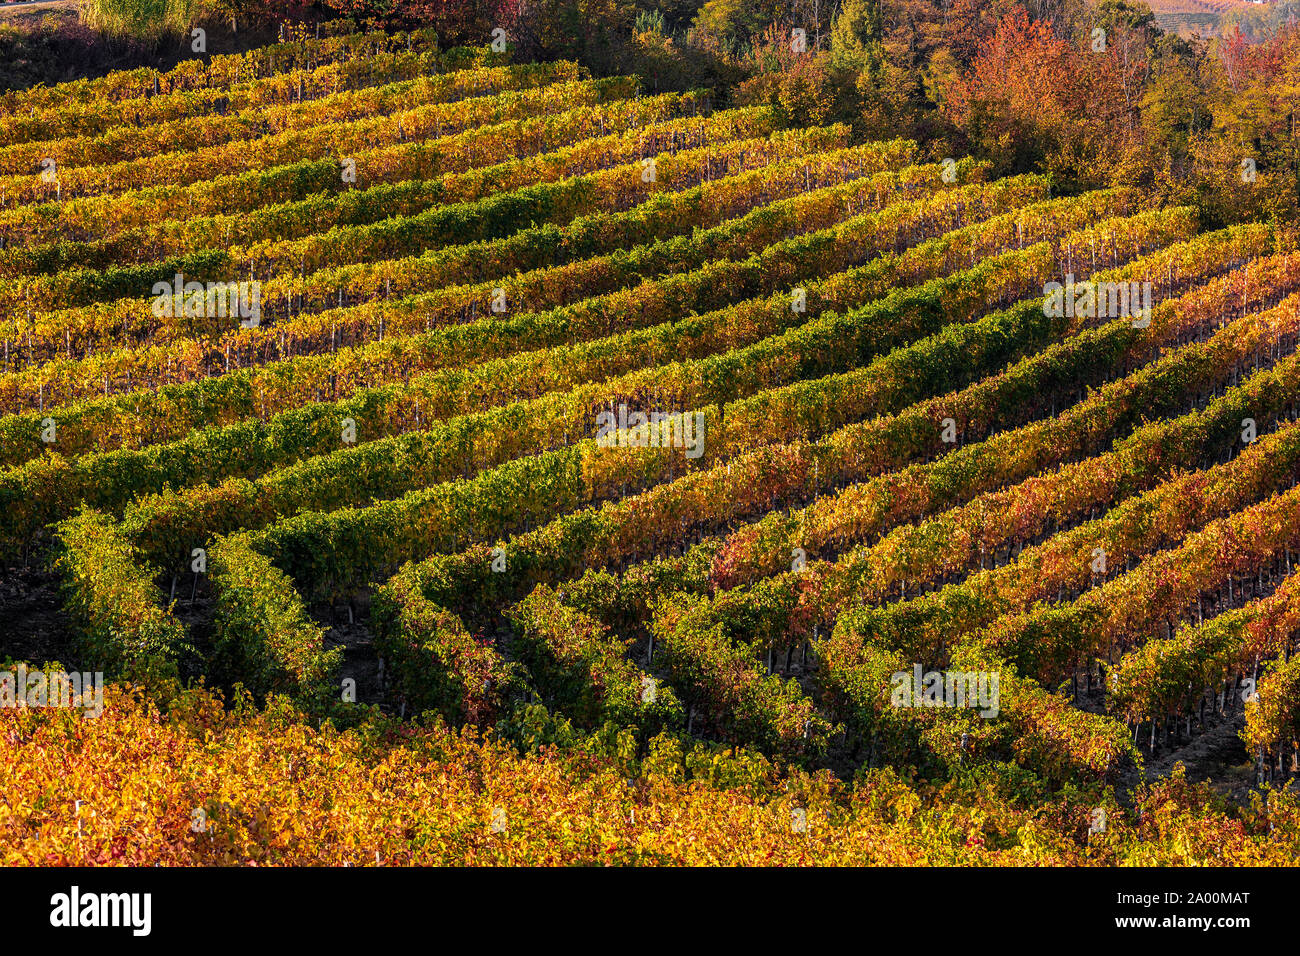 View of colorful autumnal vineyards near Barolo in Piedmont, Northern Italy. Stock Photo